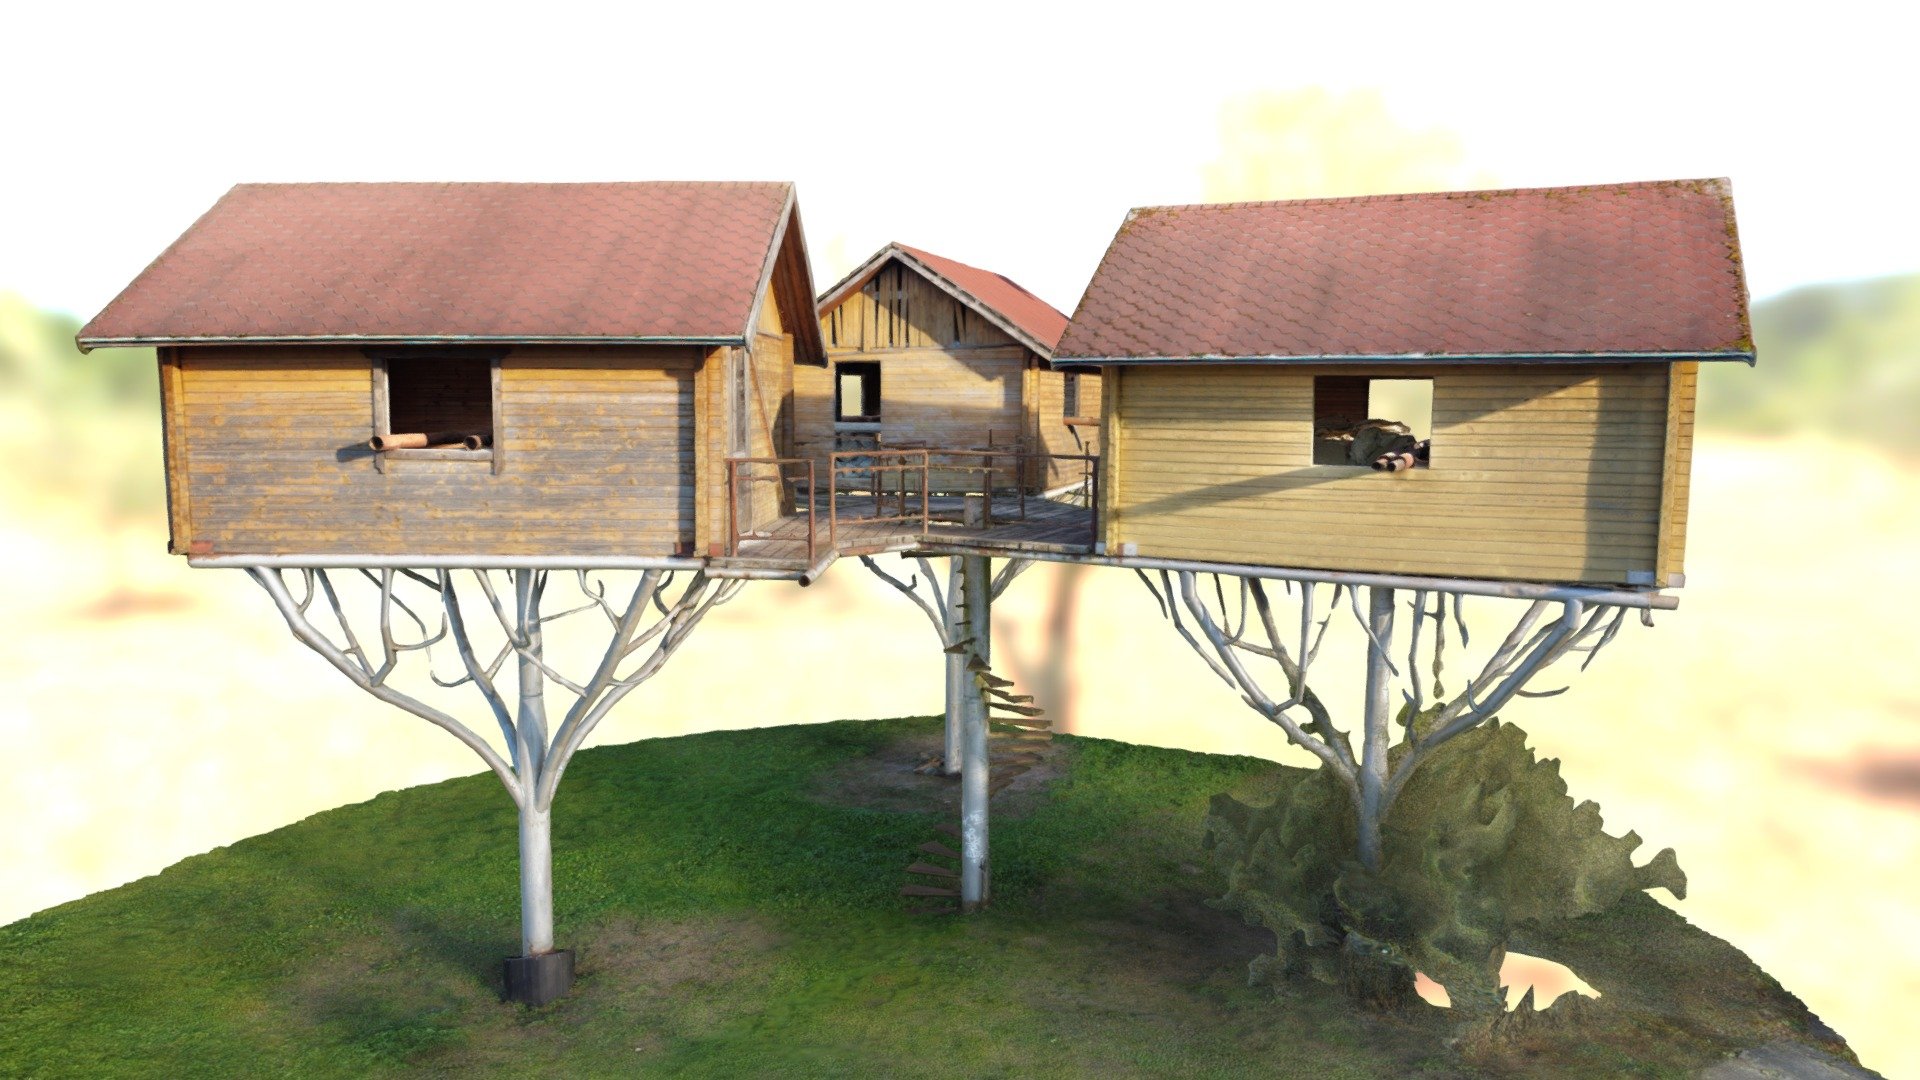 3D scan of three houses build up on a tree.
Yellow wooden walls, red roof.
Artificial tree made of metal 3d model